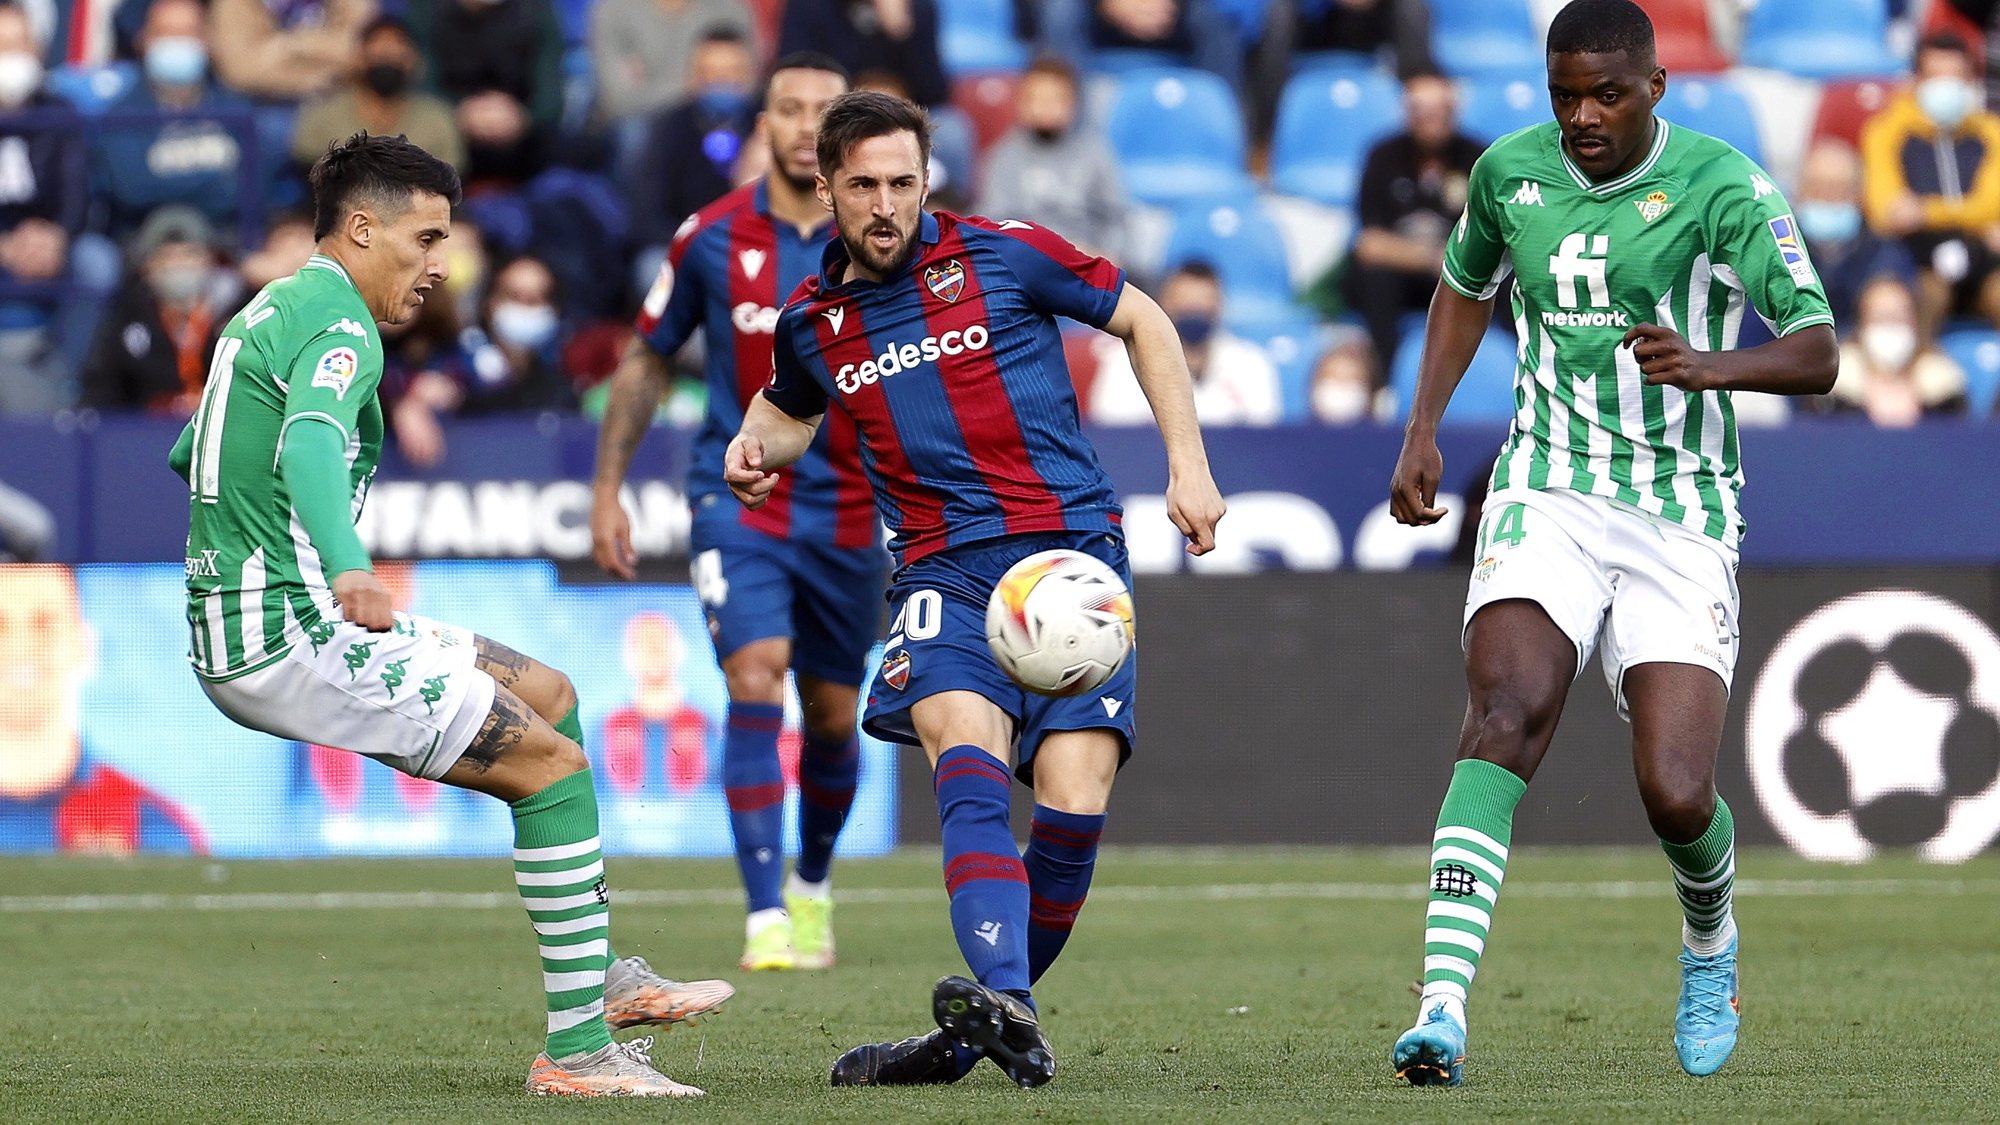 epa09753357 Levante&#039;s Jorge Miramon (C) in action against Betis players Cristian Tello (L) and William Carvalho (R) during the Spanish LaLiga soccer match between Levante UD and Real Betis in Valencia, Spain, 13 February 2022.  EPA/Kai Foersterling